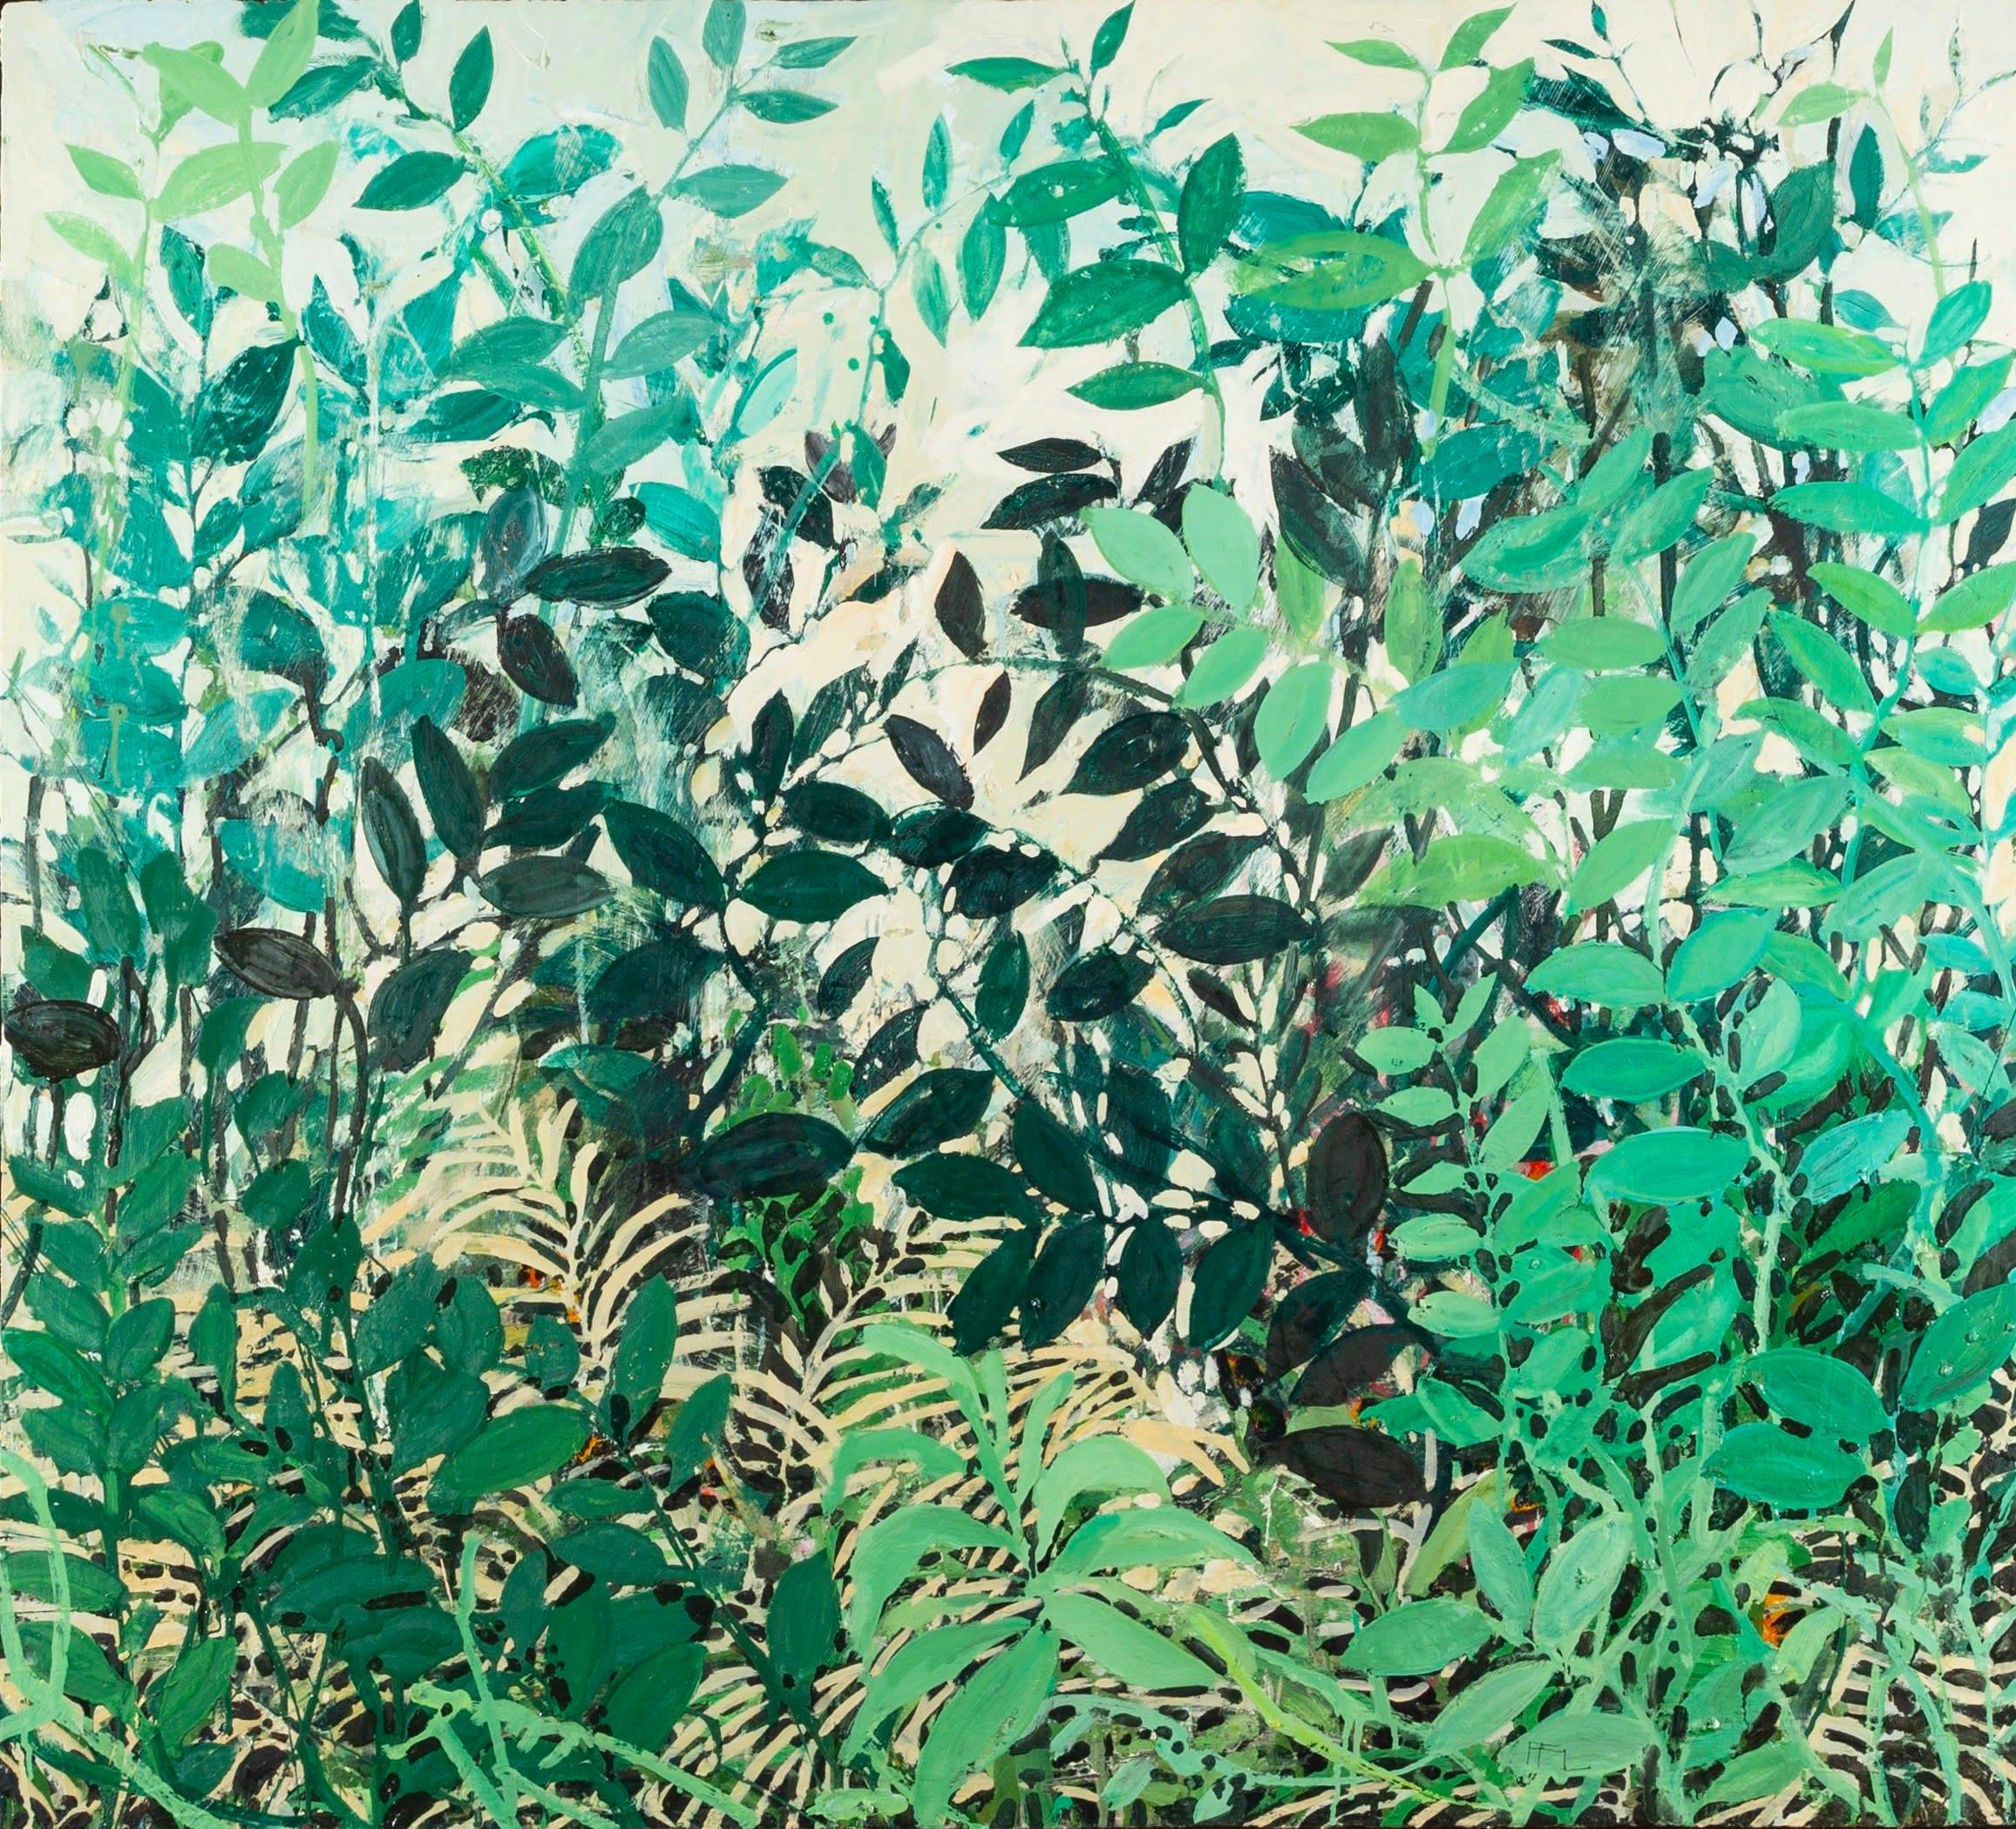 Unknown Landscape Painting - Feeling Green; Seeing Red, Oil on Board Painting by Ffiona Lewis, 2021